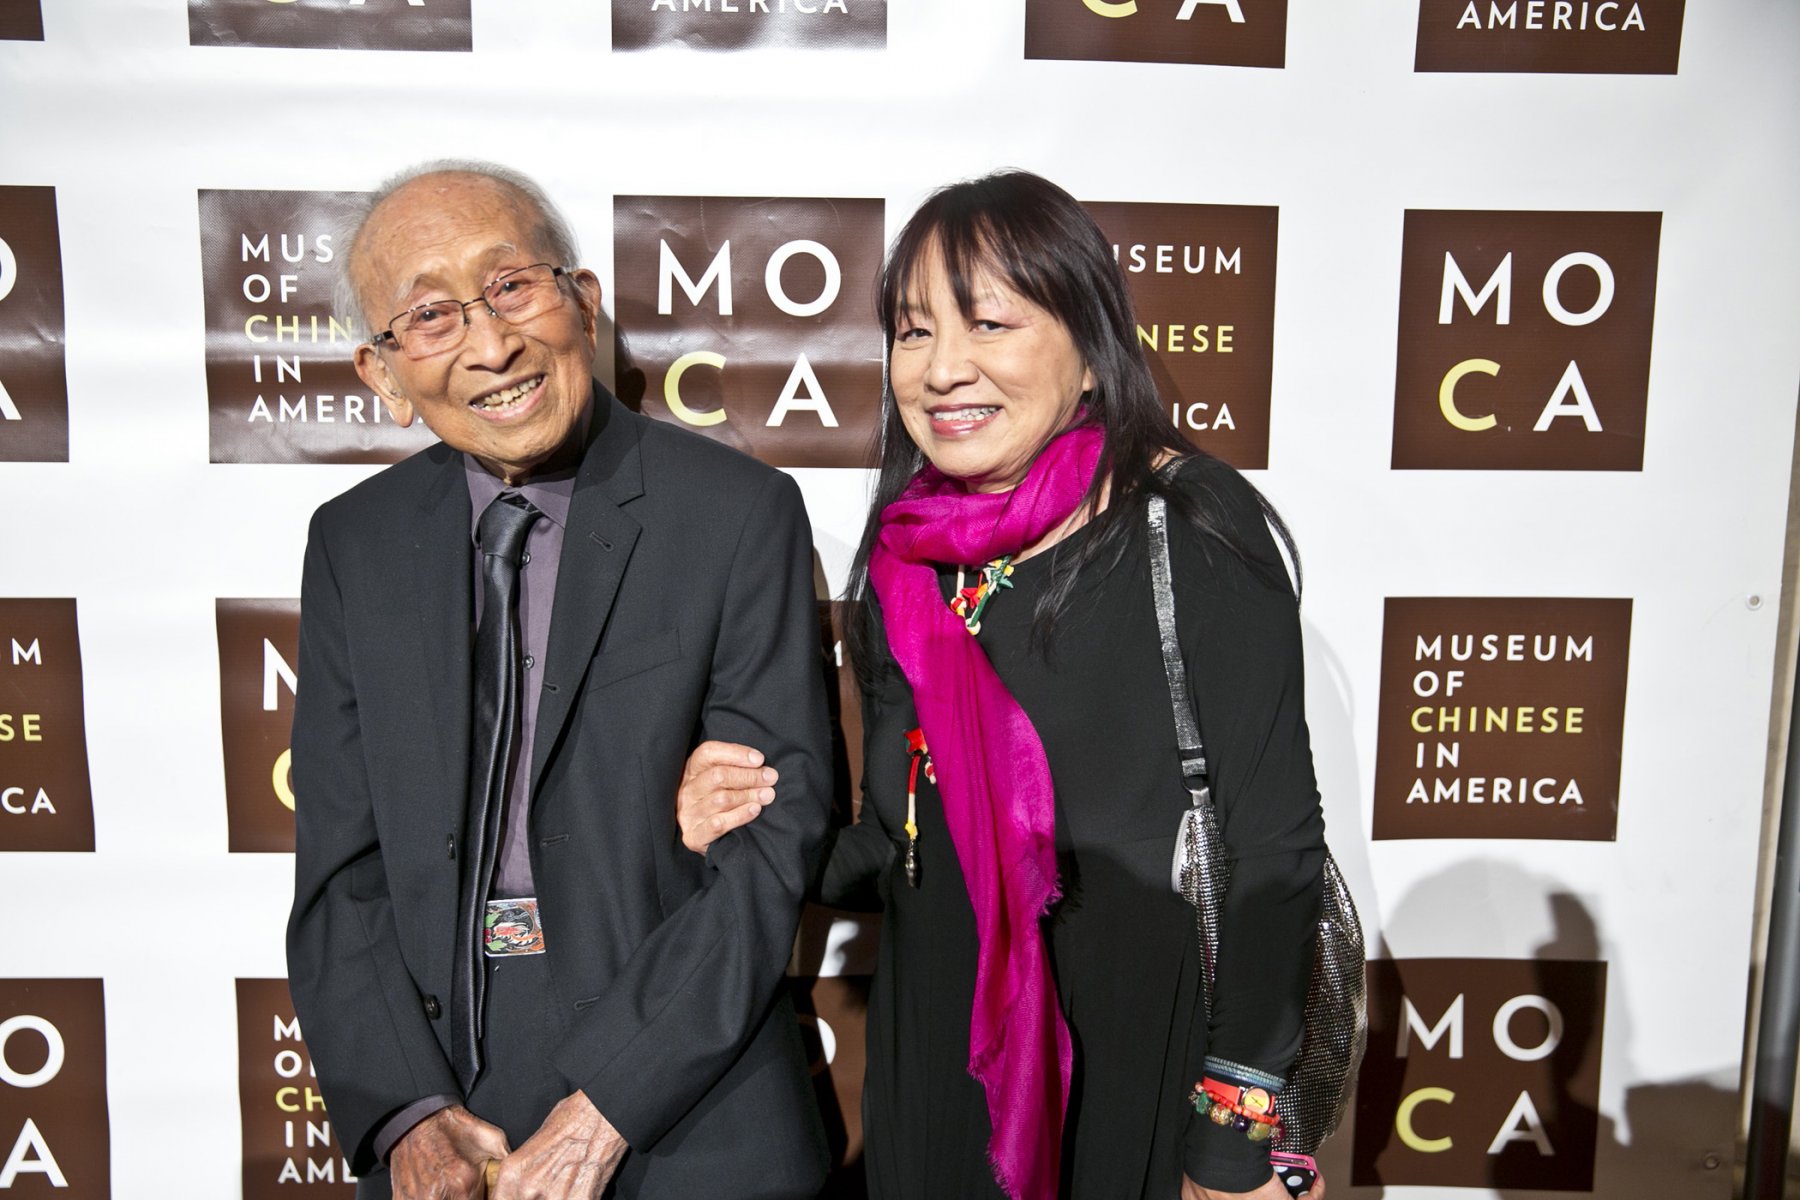 23 September 2019 Posted.
Tyrus Wong (Left) with his daughter Kim (Right) at the 2014 MOCA Gala, Museum of Chinese in America (MOCA) Institutional Archives.
黄齐耀（左）和他的女儿Kim（右）在2014年的MOCA年度传承慈善晚宴上，美国华人博物馆（MOCA）机构档案